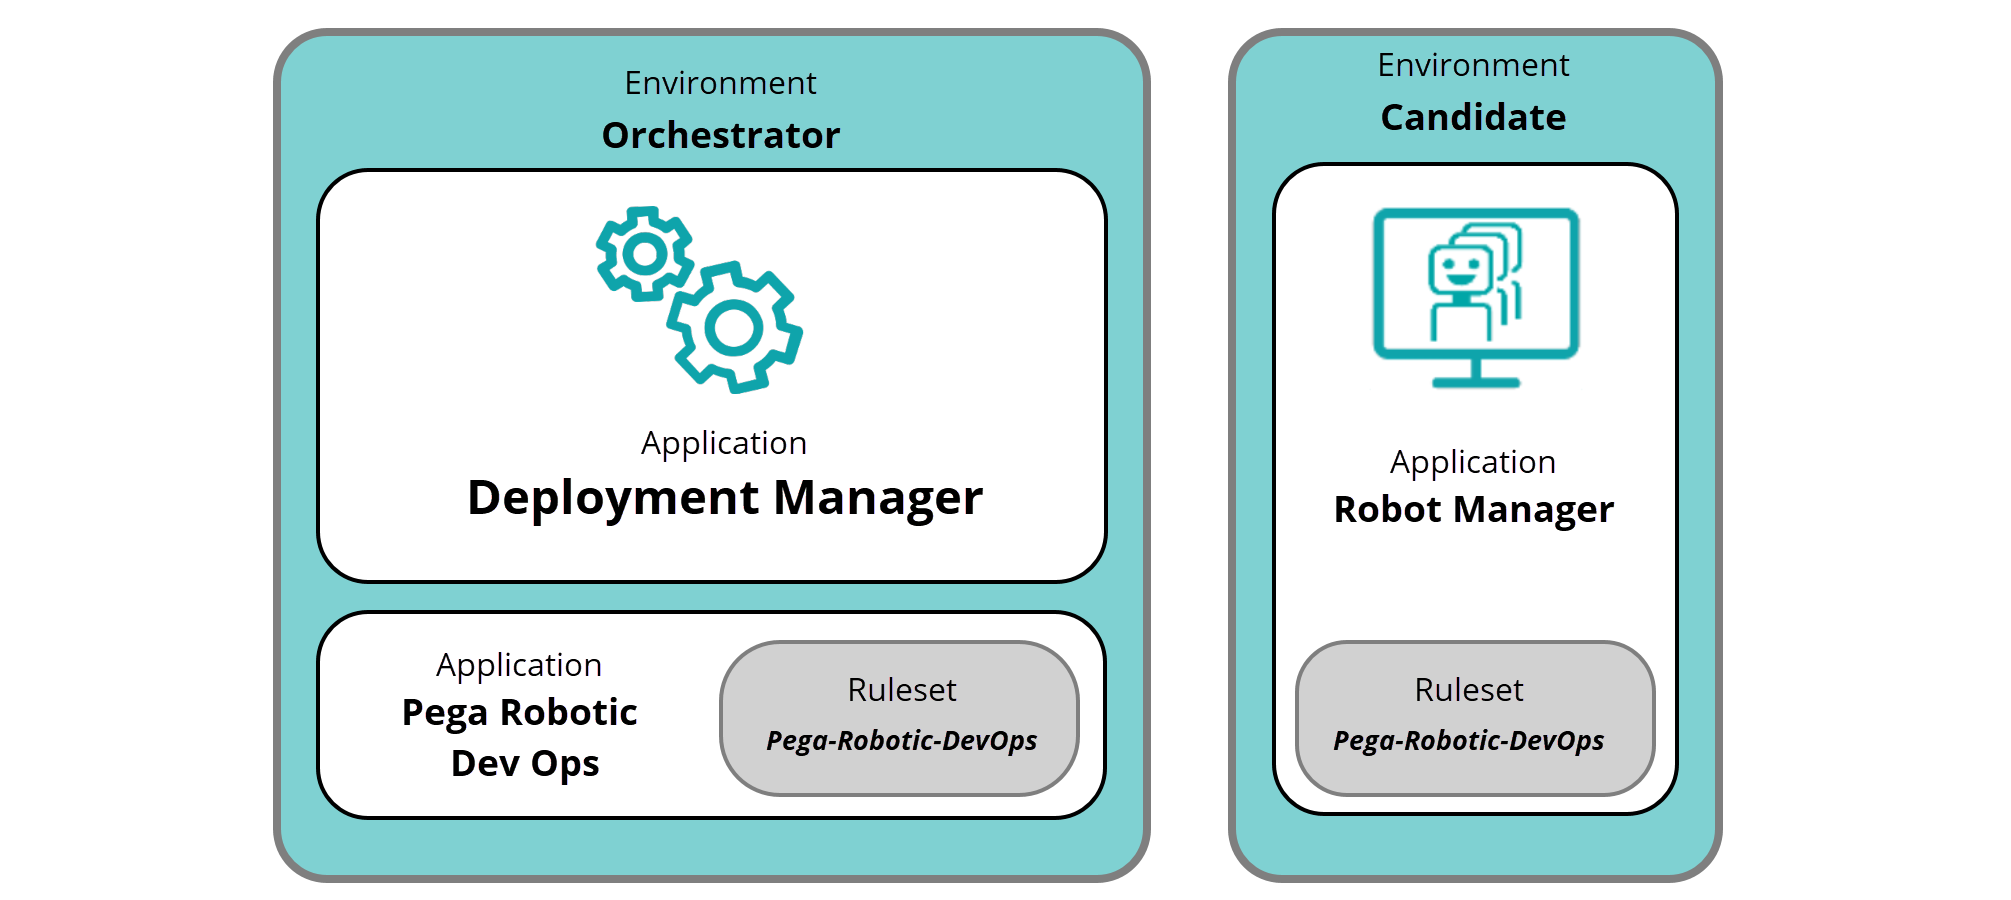 Migrating Robot Manager applications between environments requires two types of environments: Orchestrator and Candidate